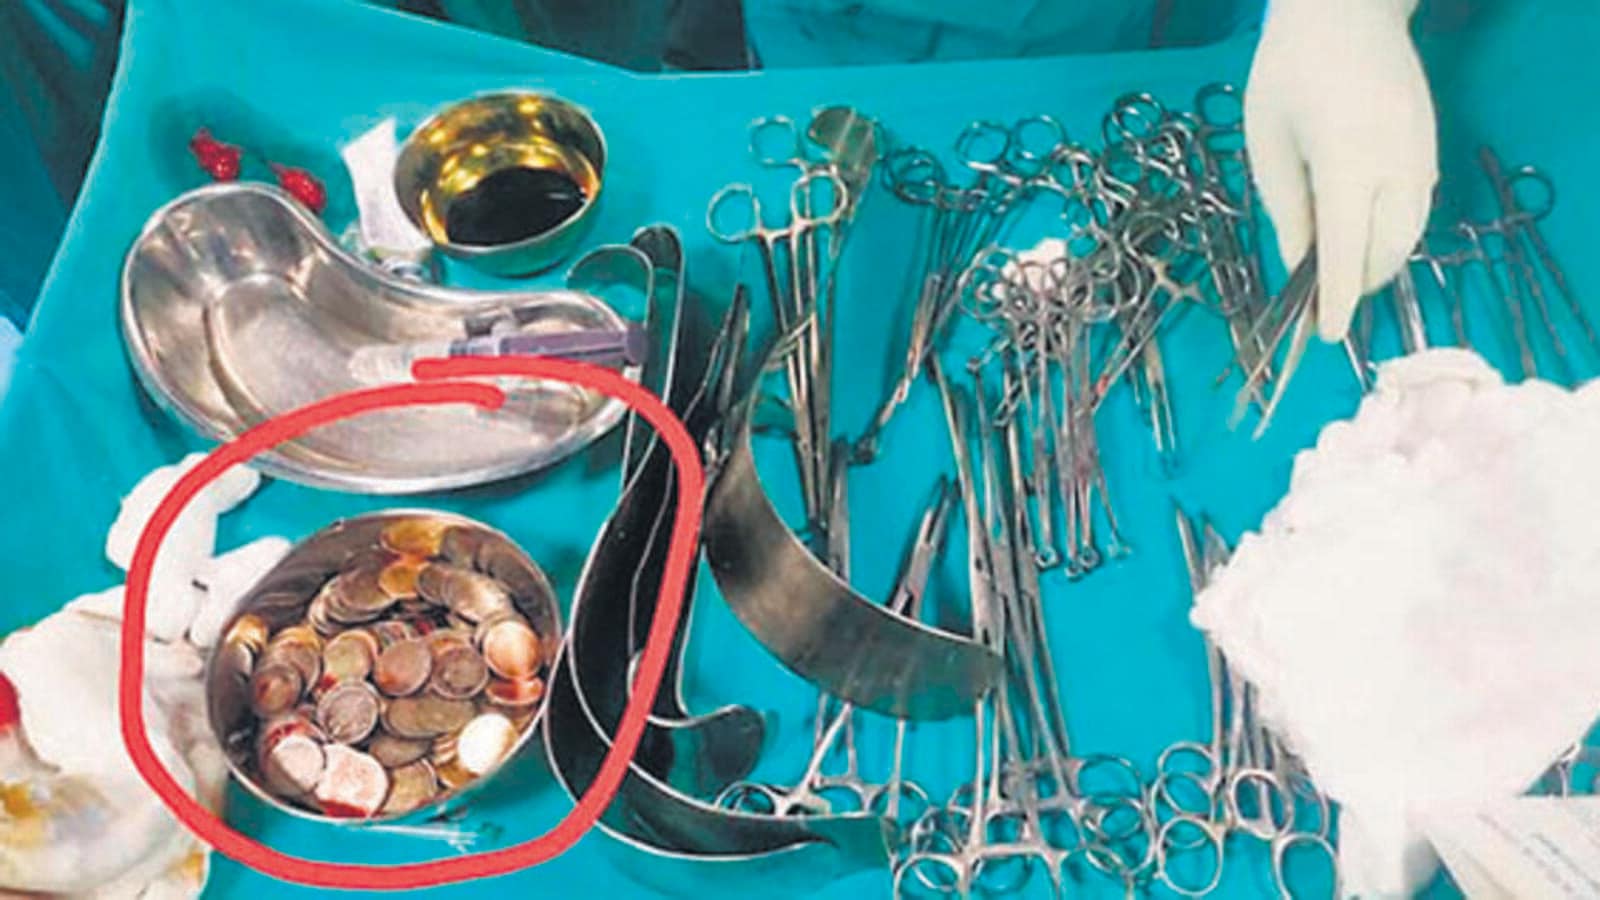 Bagalkot: Doctors remove 187 coins from man's stomach | Latest News India -  Hindustan Times